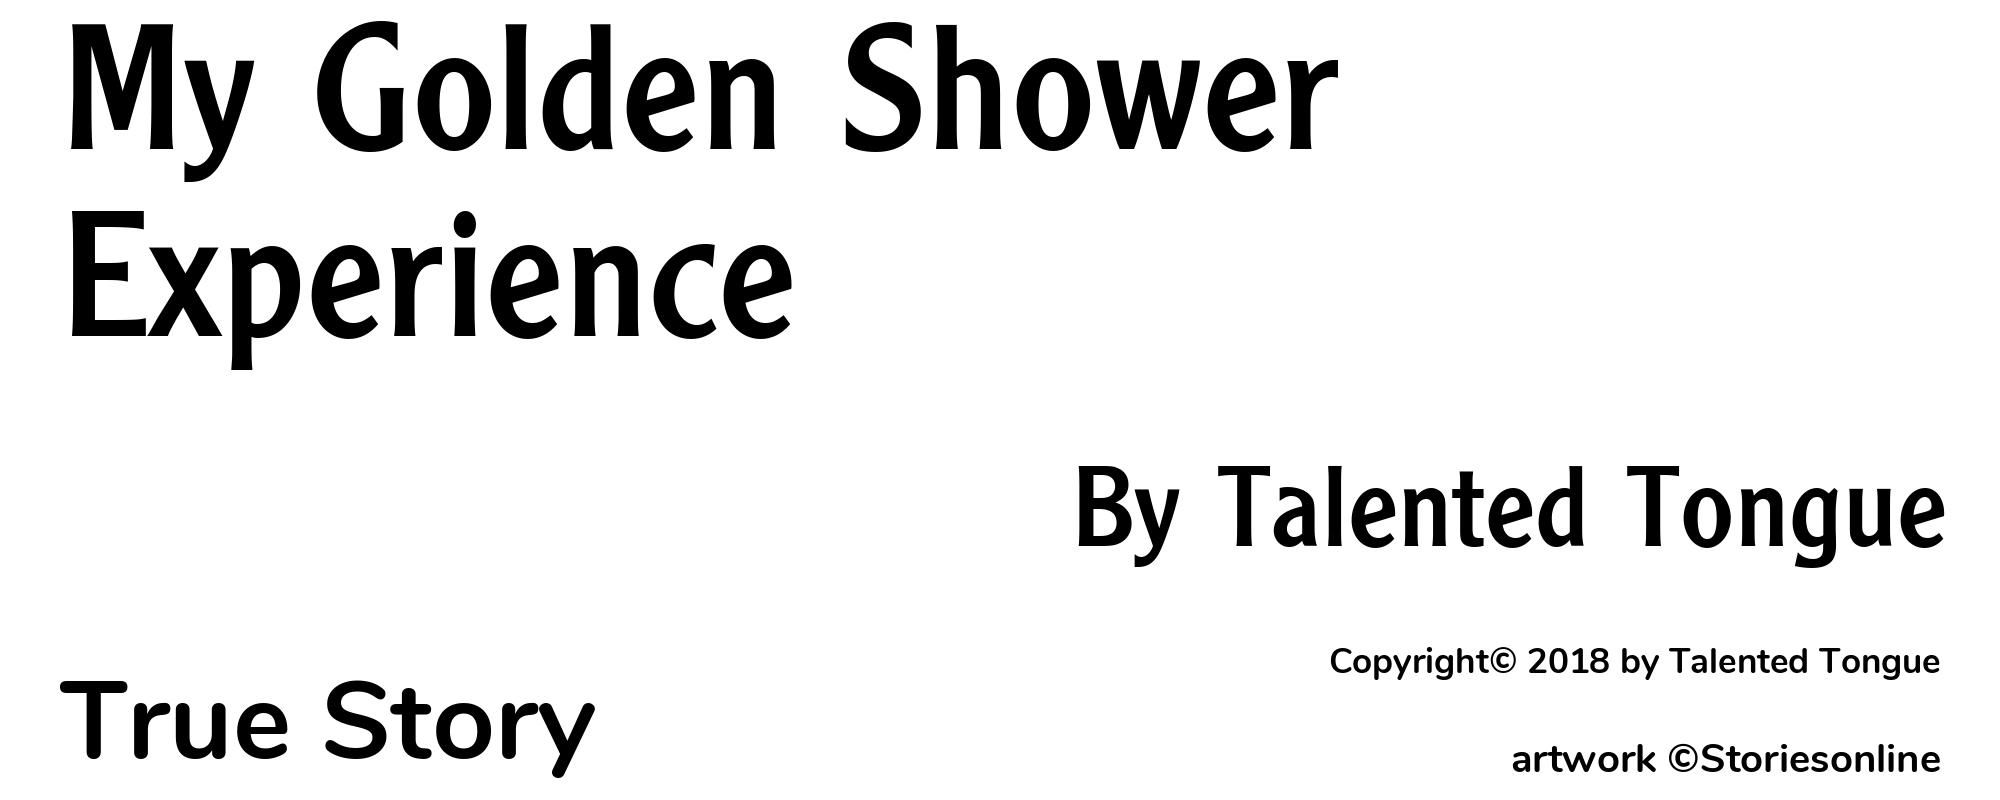 My Golden Shower Experience - Cover